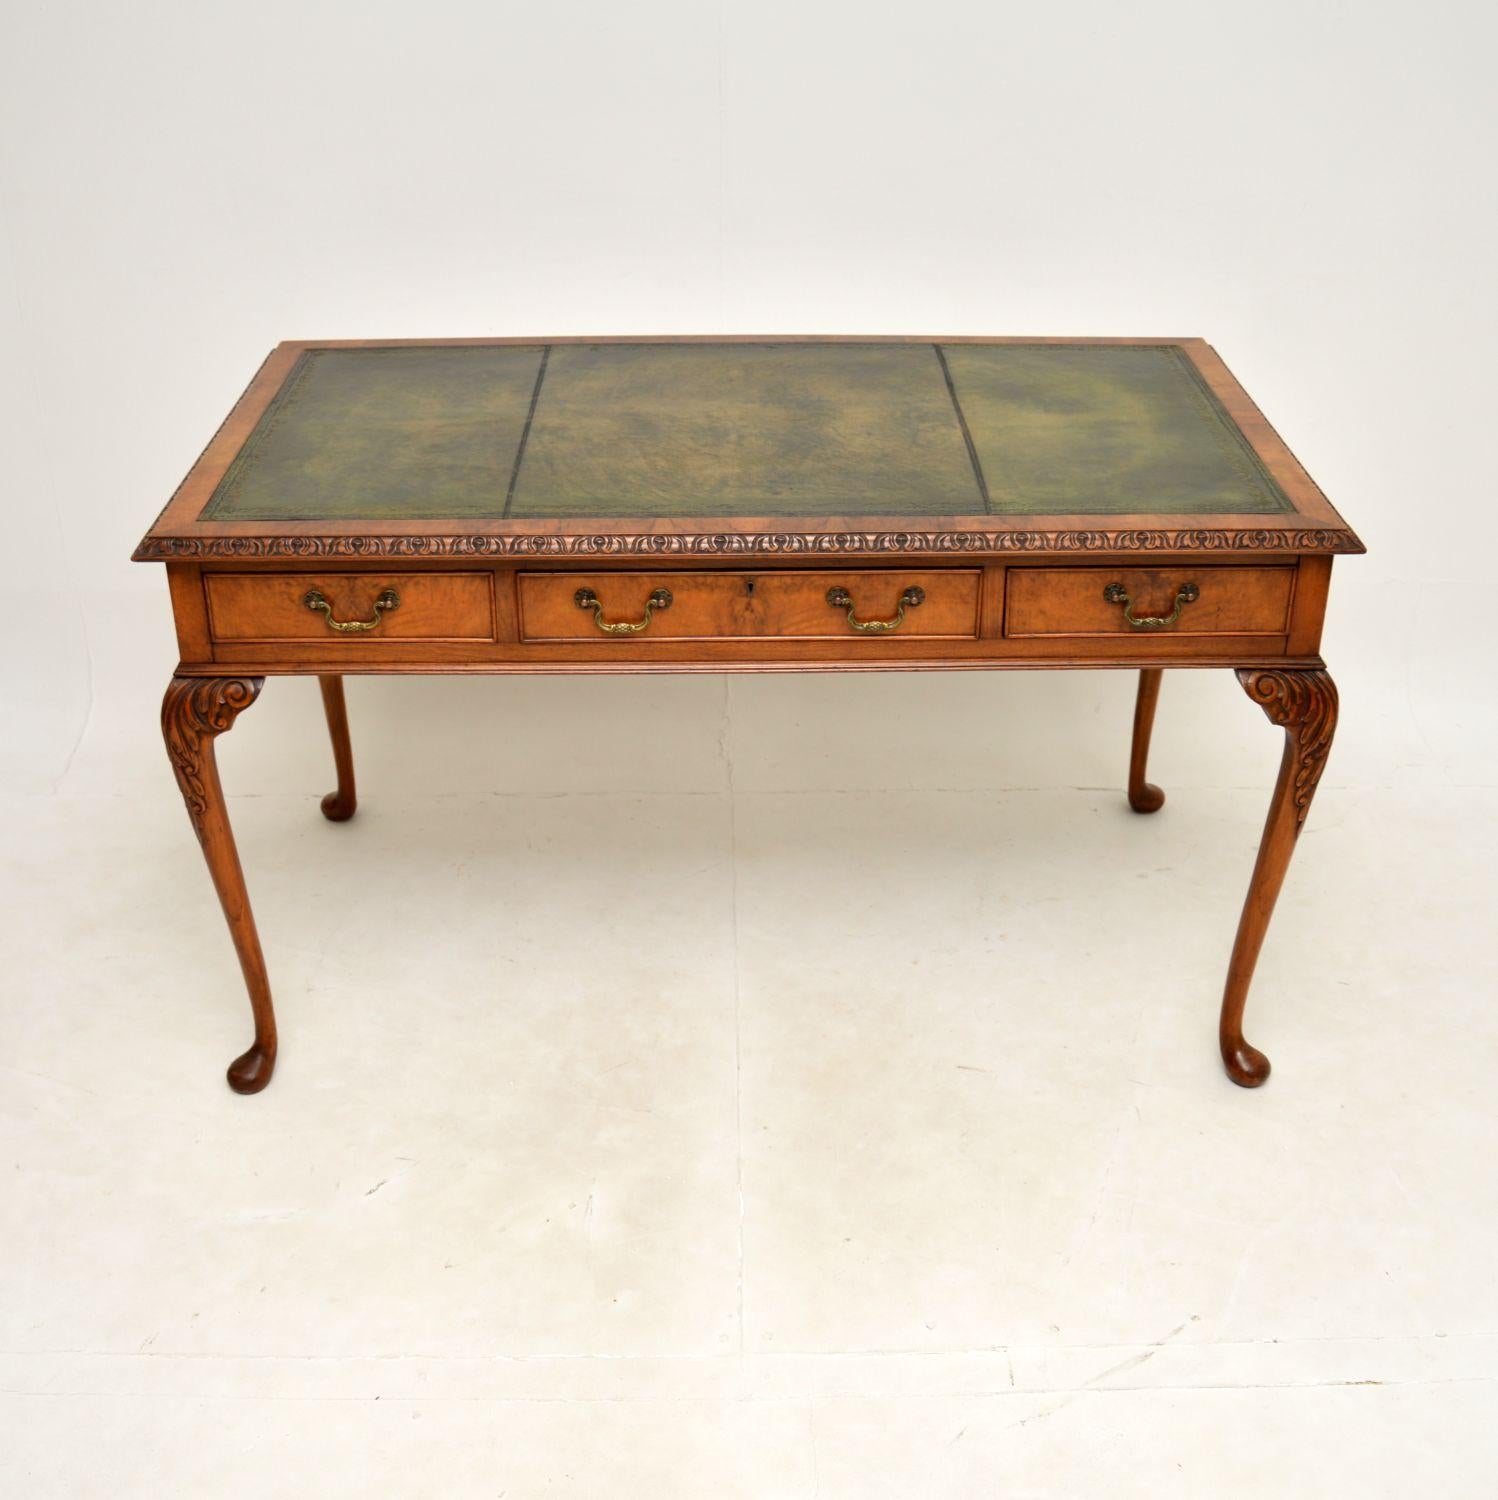 A stunning antique burr walnut leather top desk / writing table. This is in the Queen Anne style, it was made in England and dates from around the 1900-1920 period.

It is of superb quality and is a great size, with plenty of working space. The